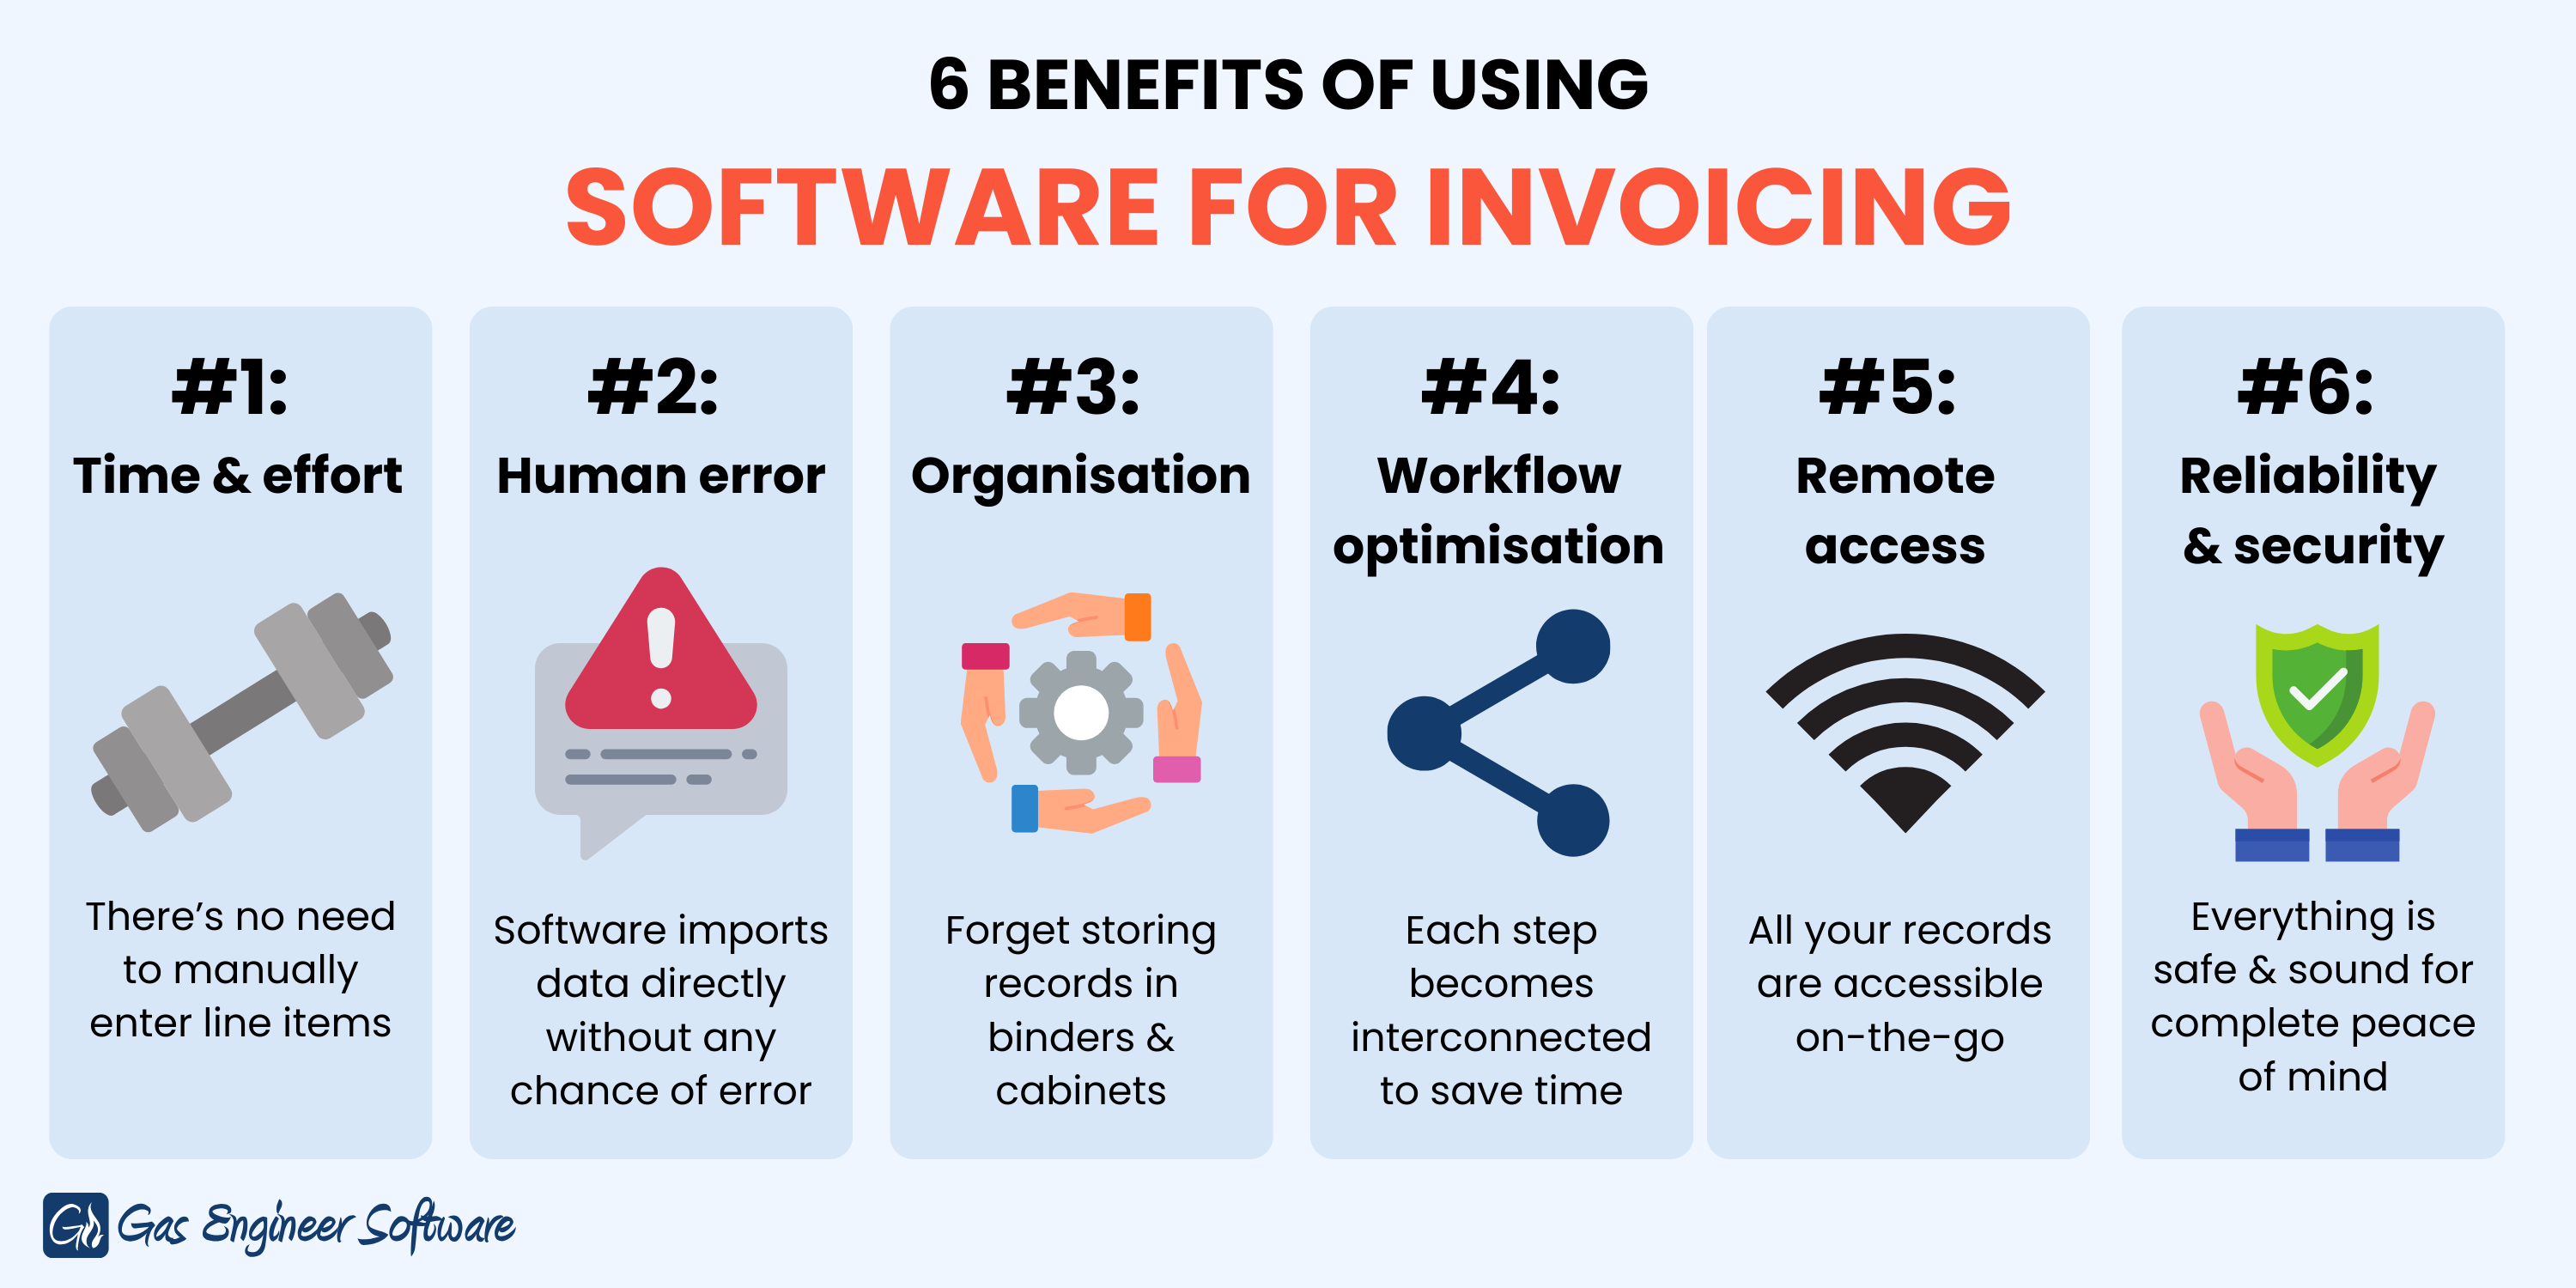 The benefits of using software for invoicing